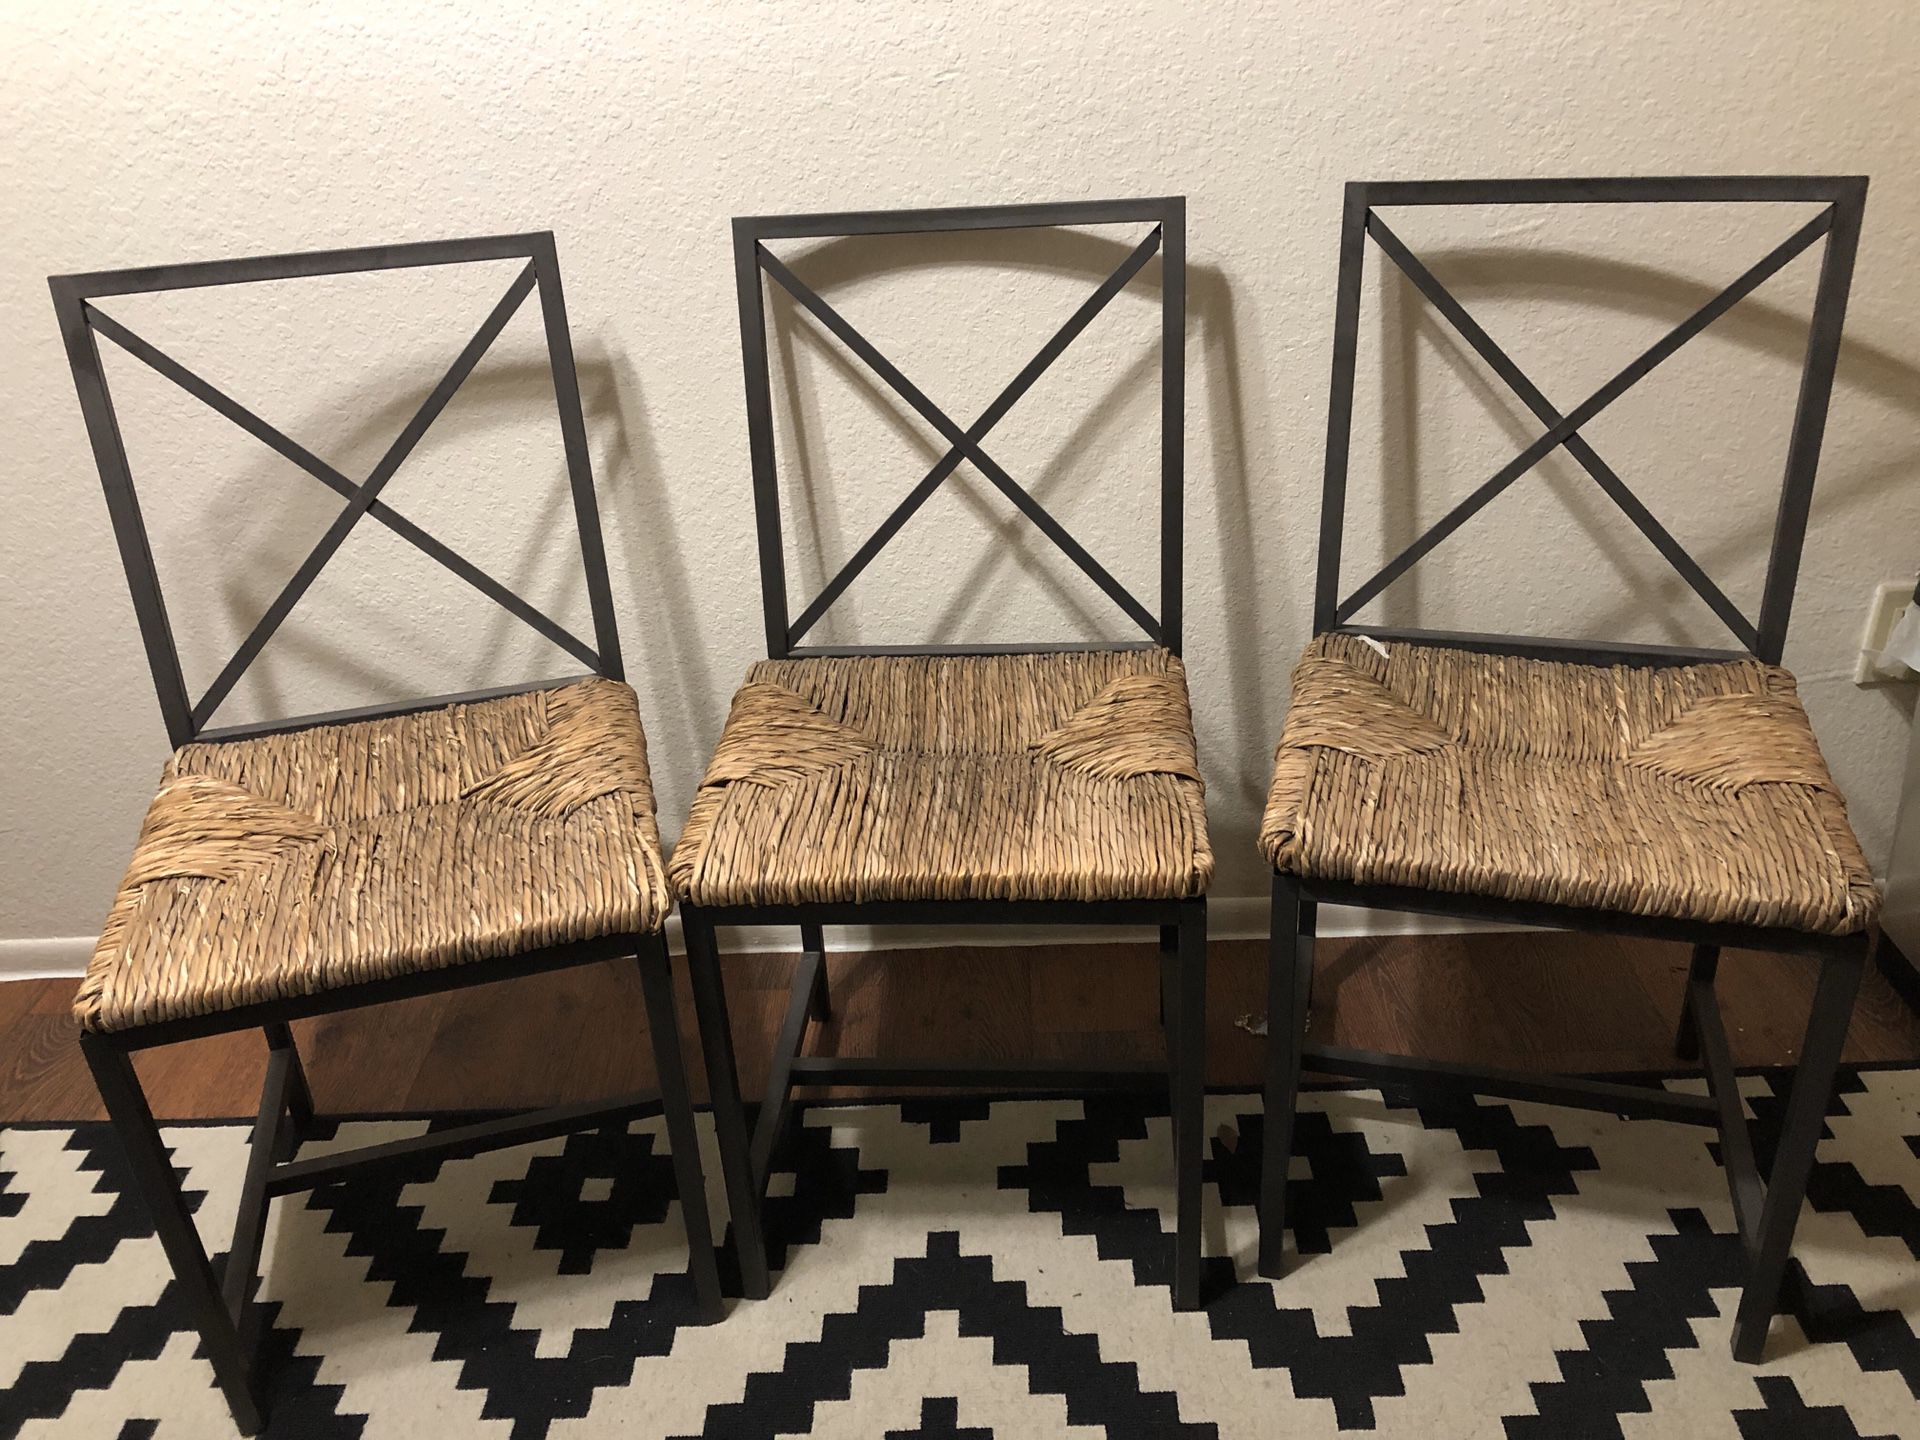 3 wicker chairs